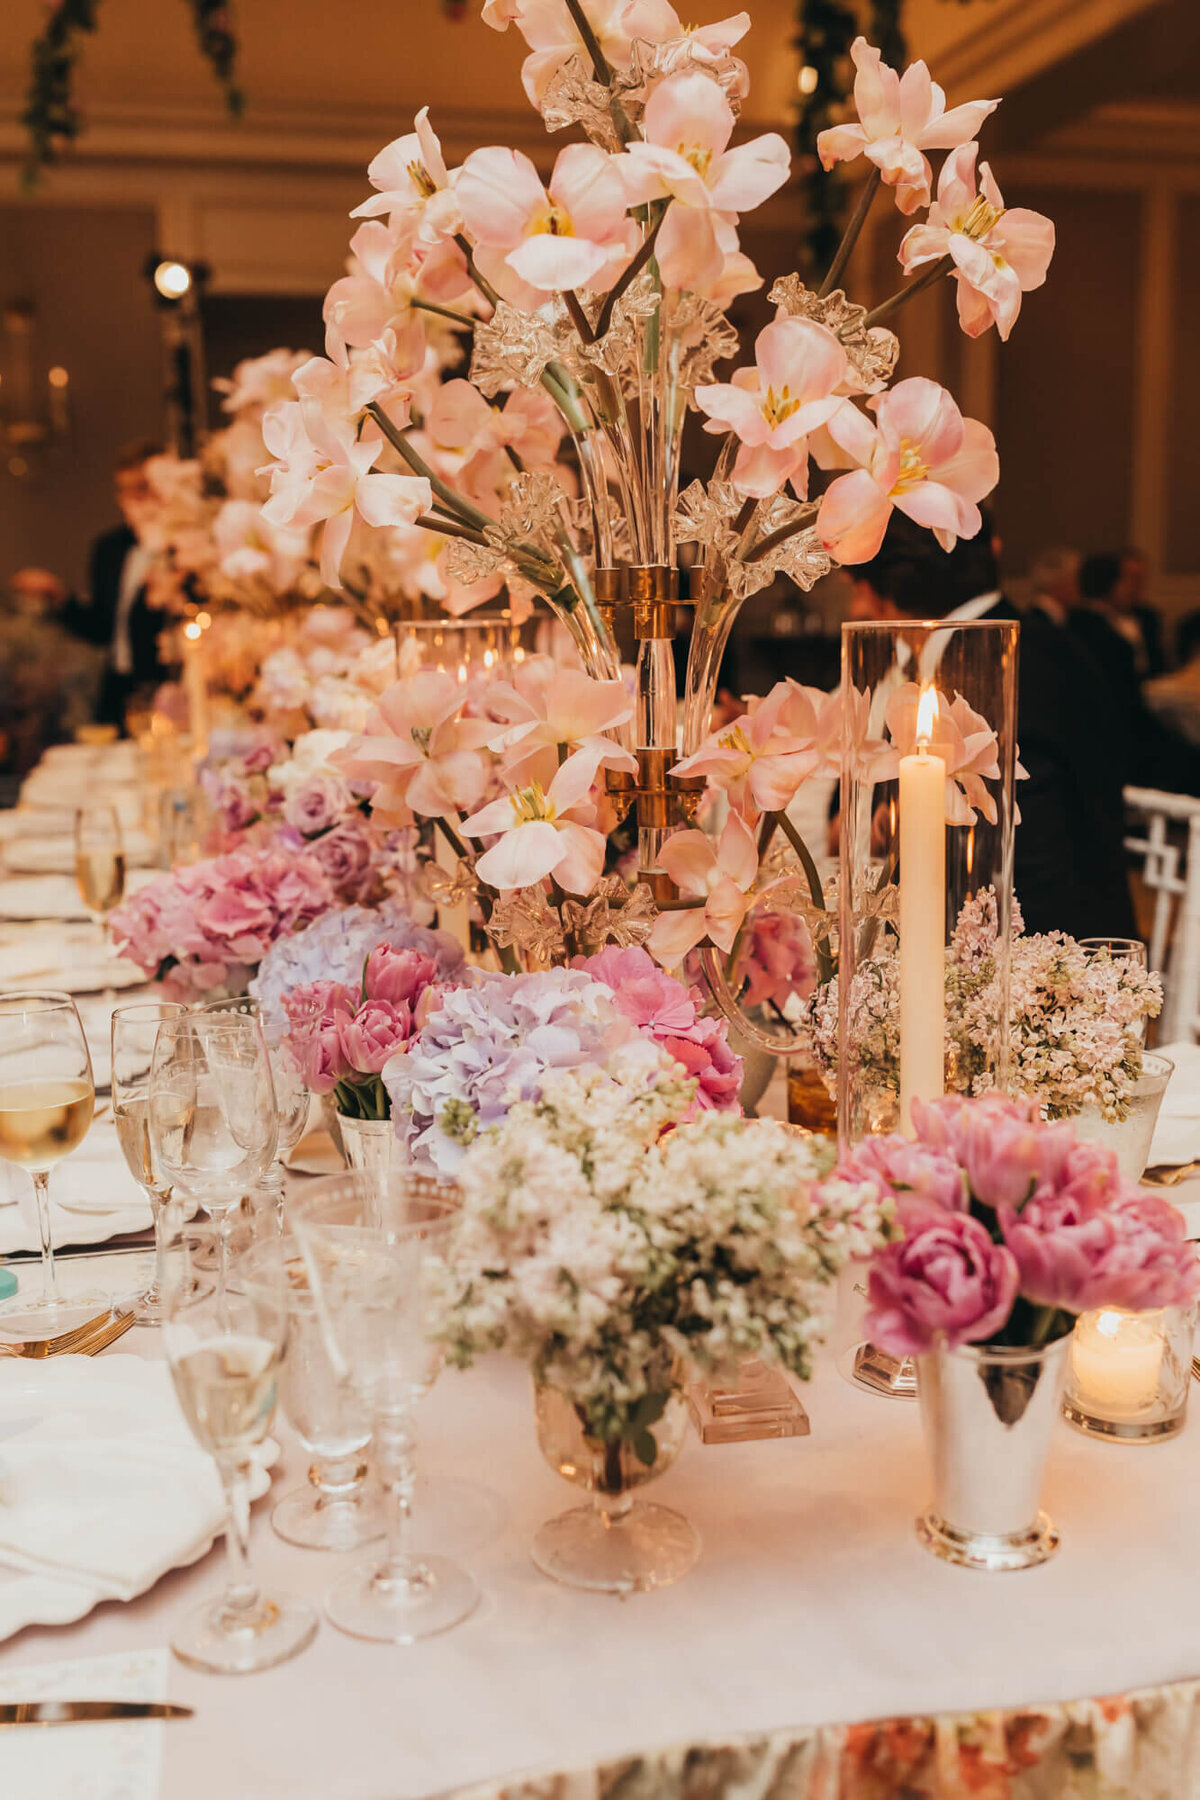 tablescape of florals, pink and white, at ceremony.